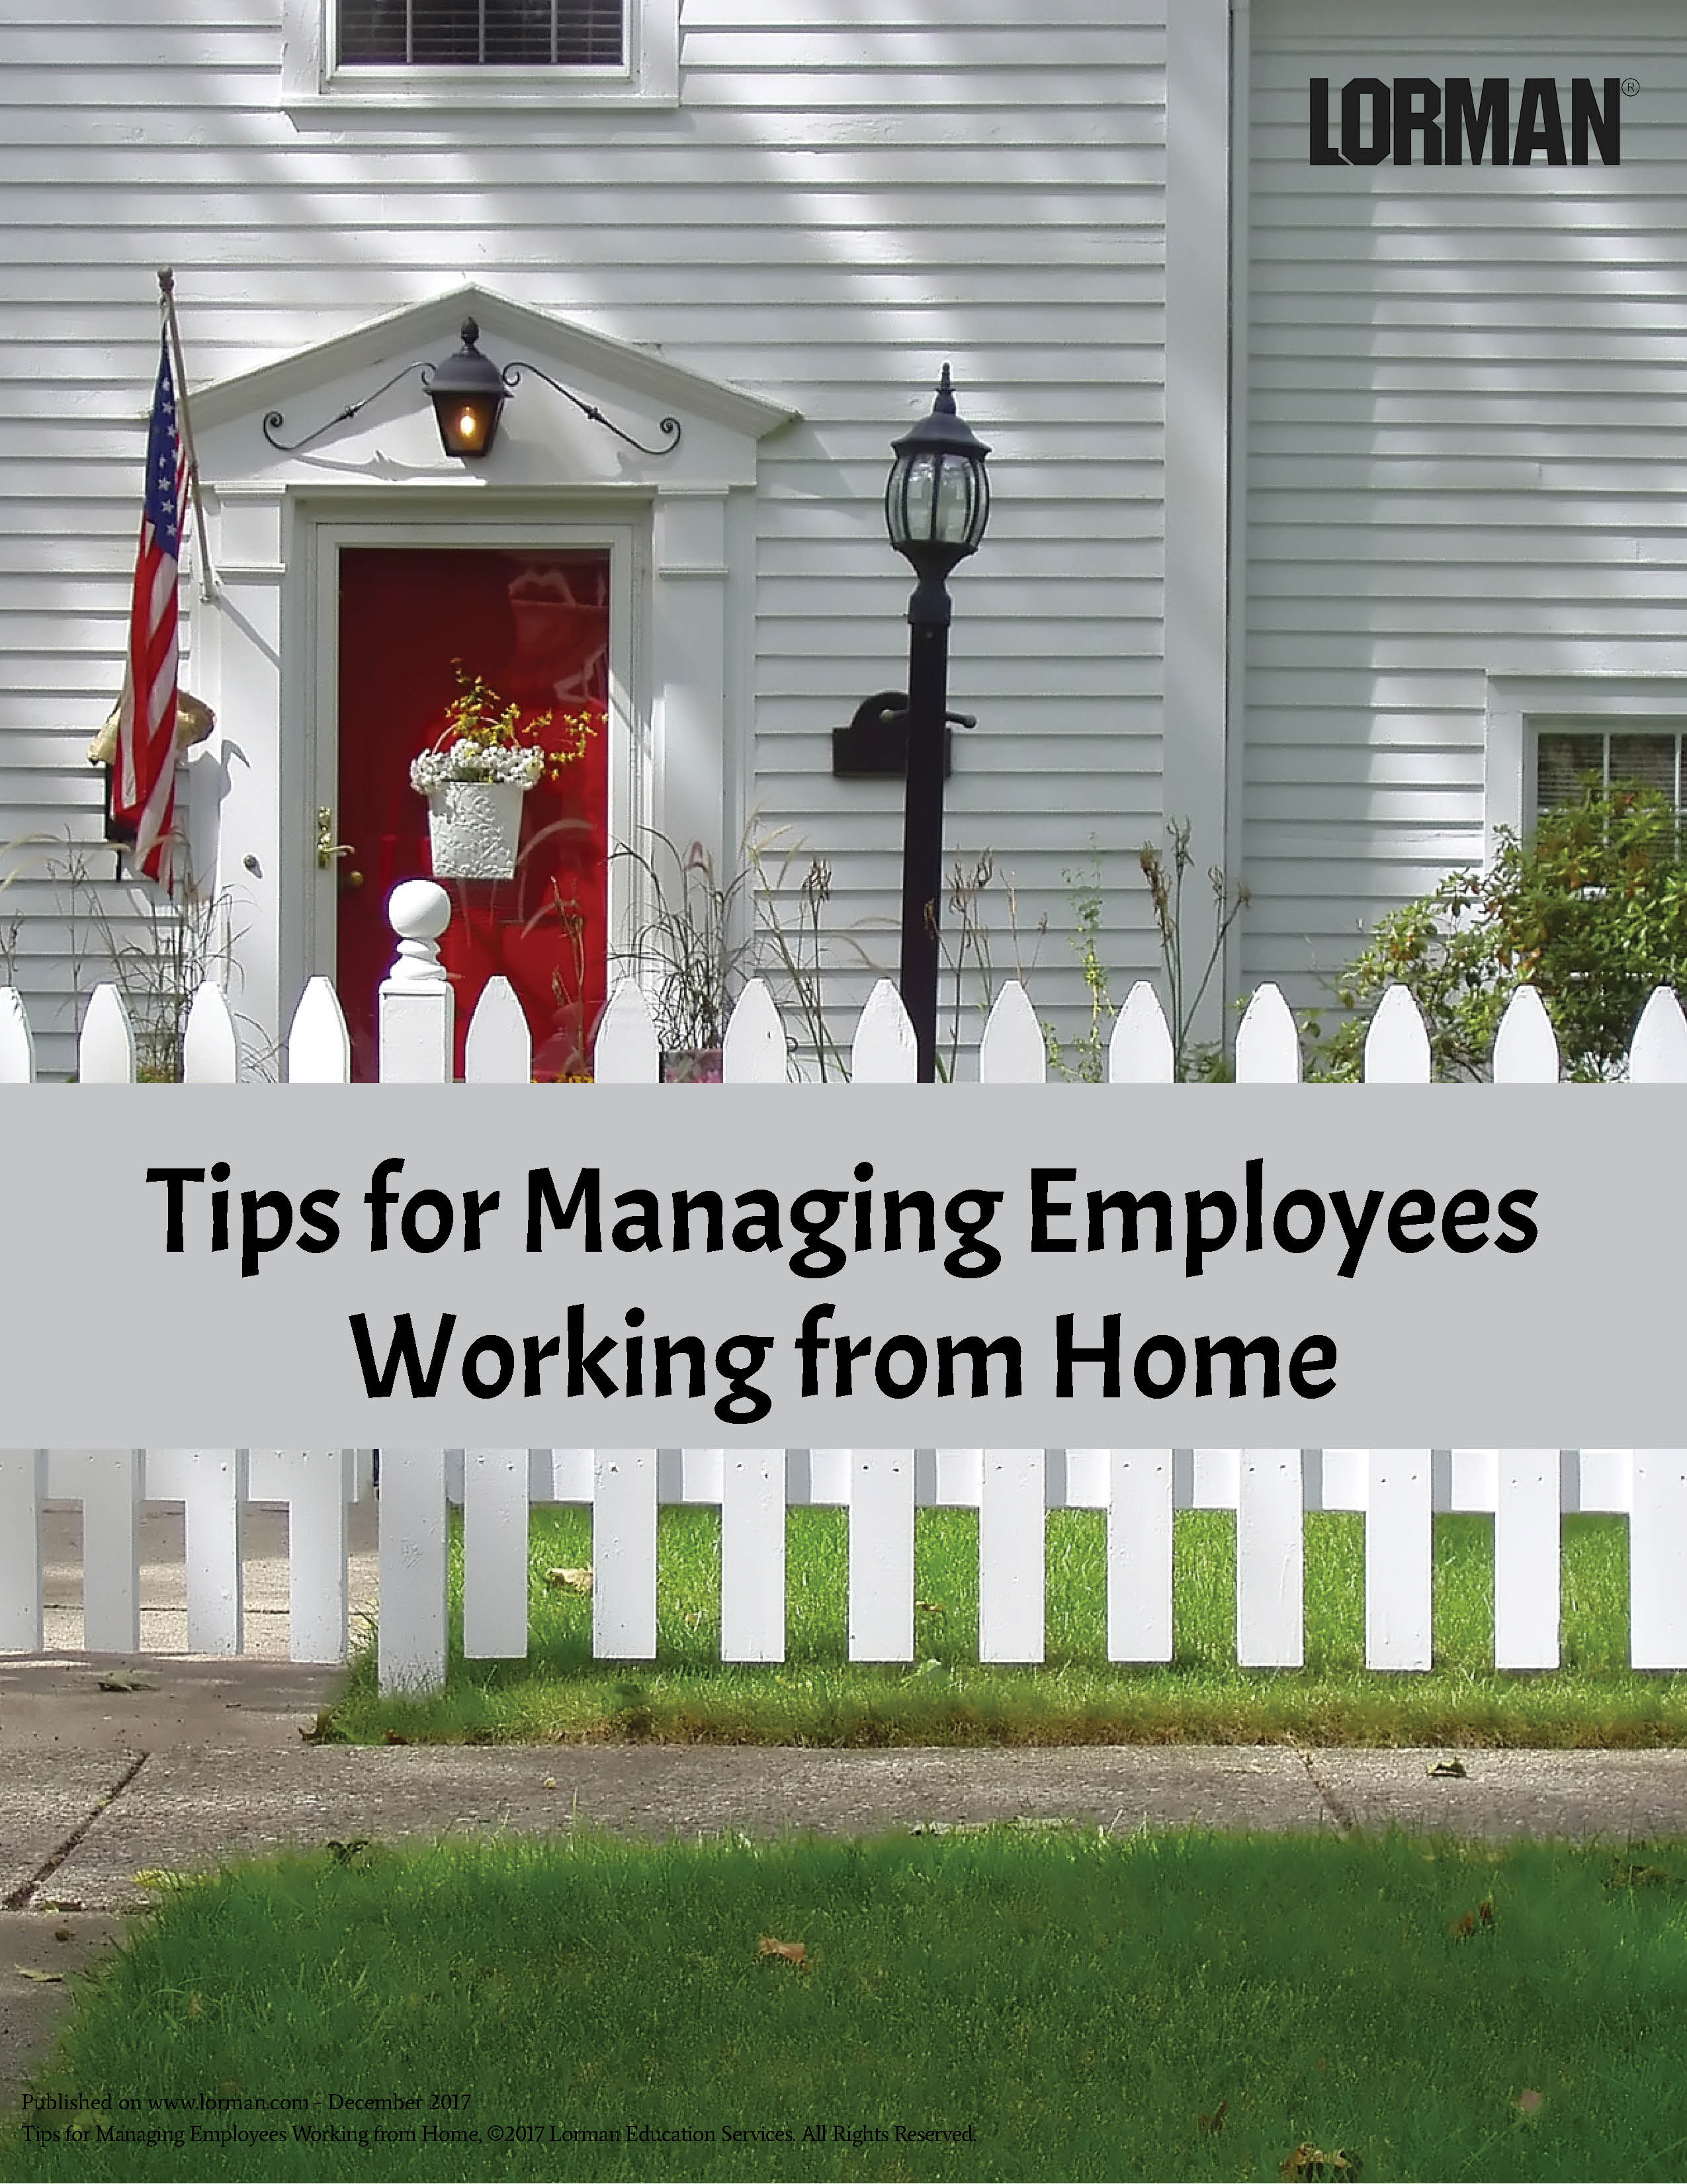 Tips for Managing Employees Working from Home